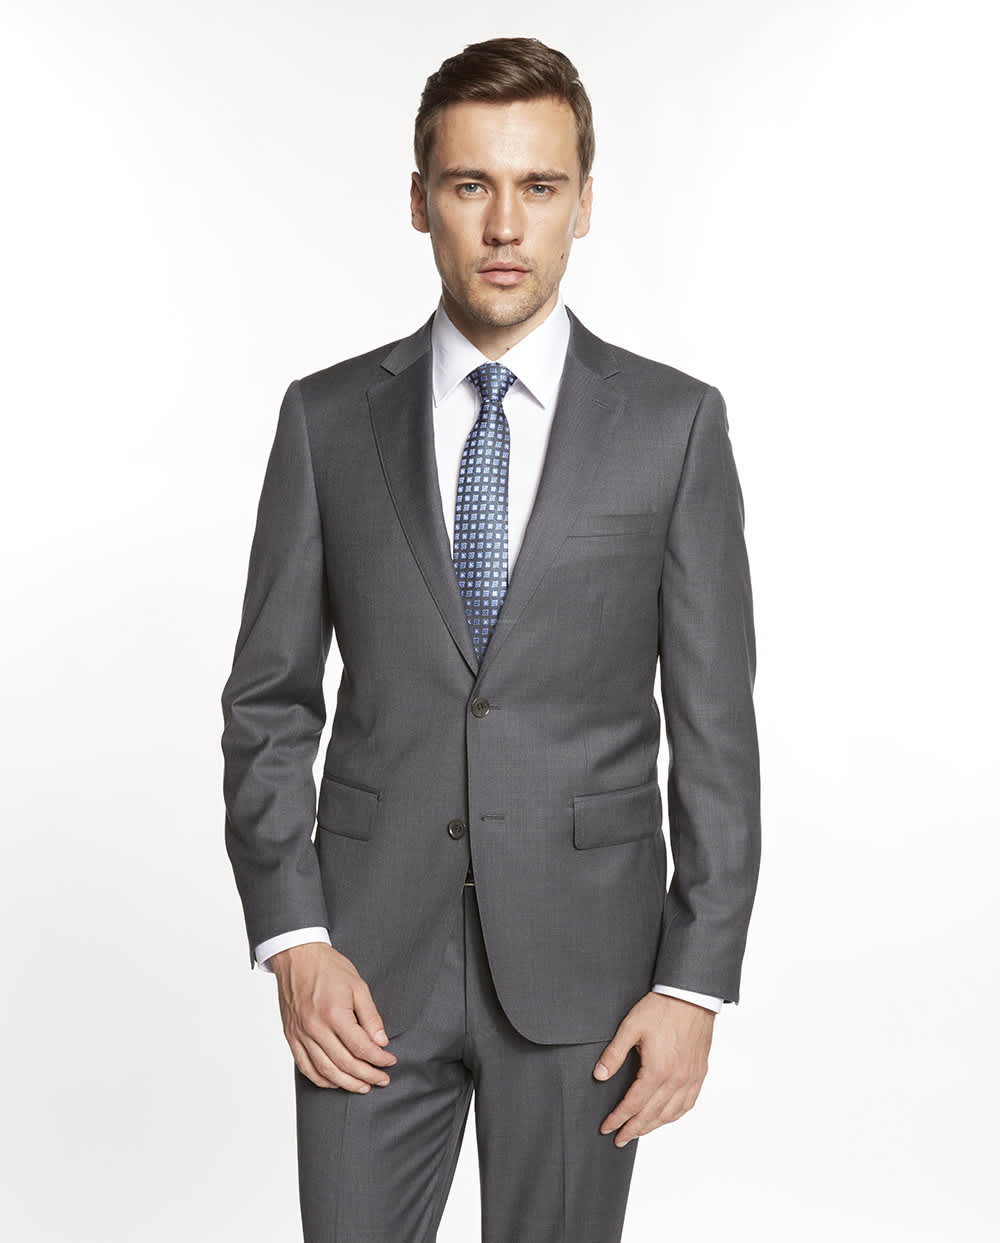 Tuscany Steel Grey Suit Incognito Menswear Rochester (Penfield), NY